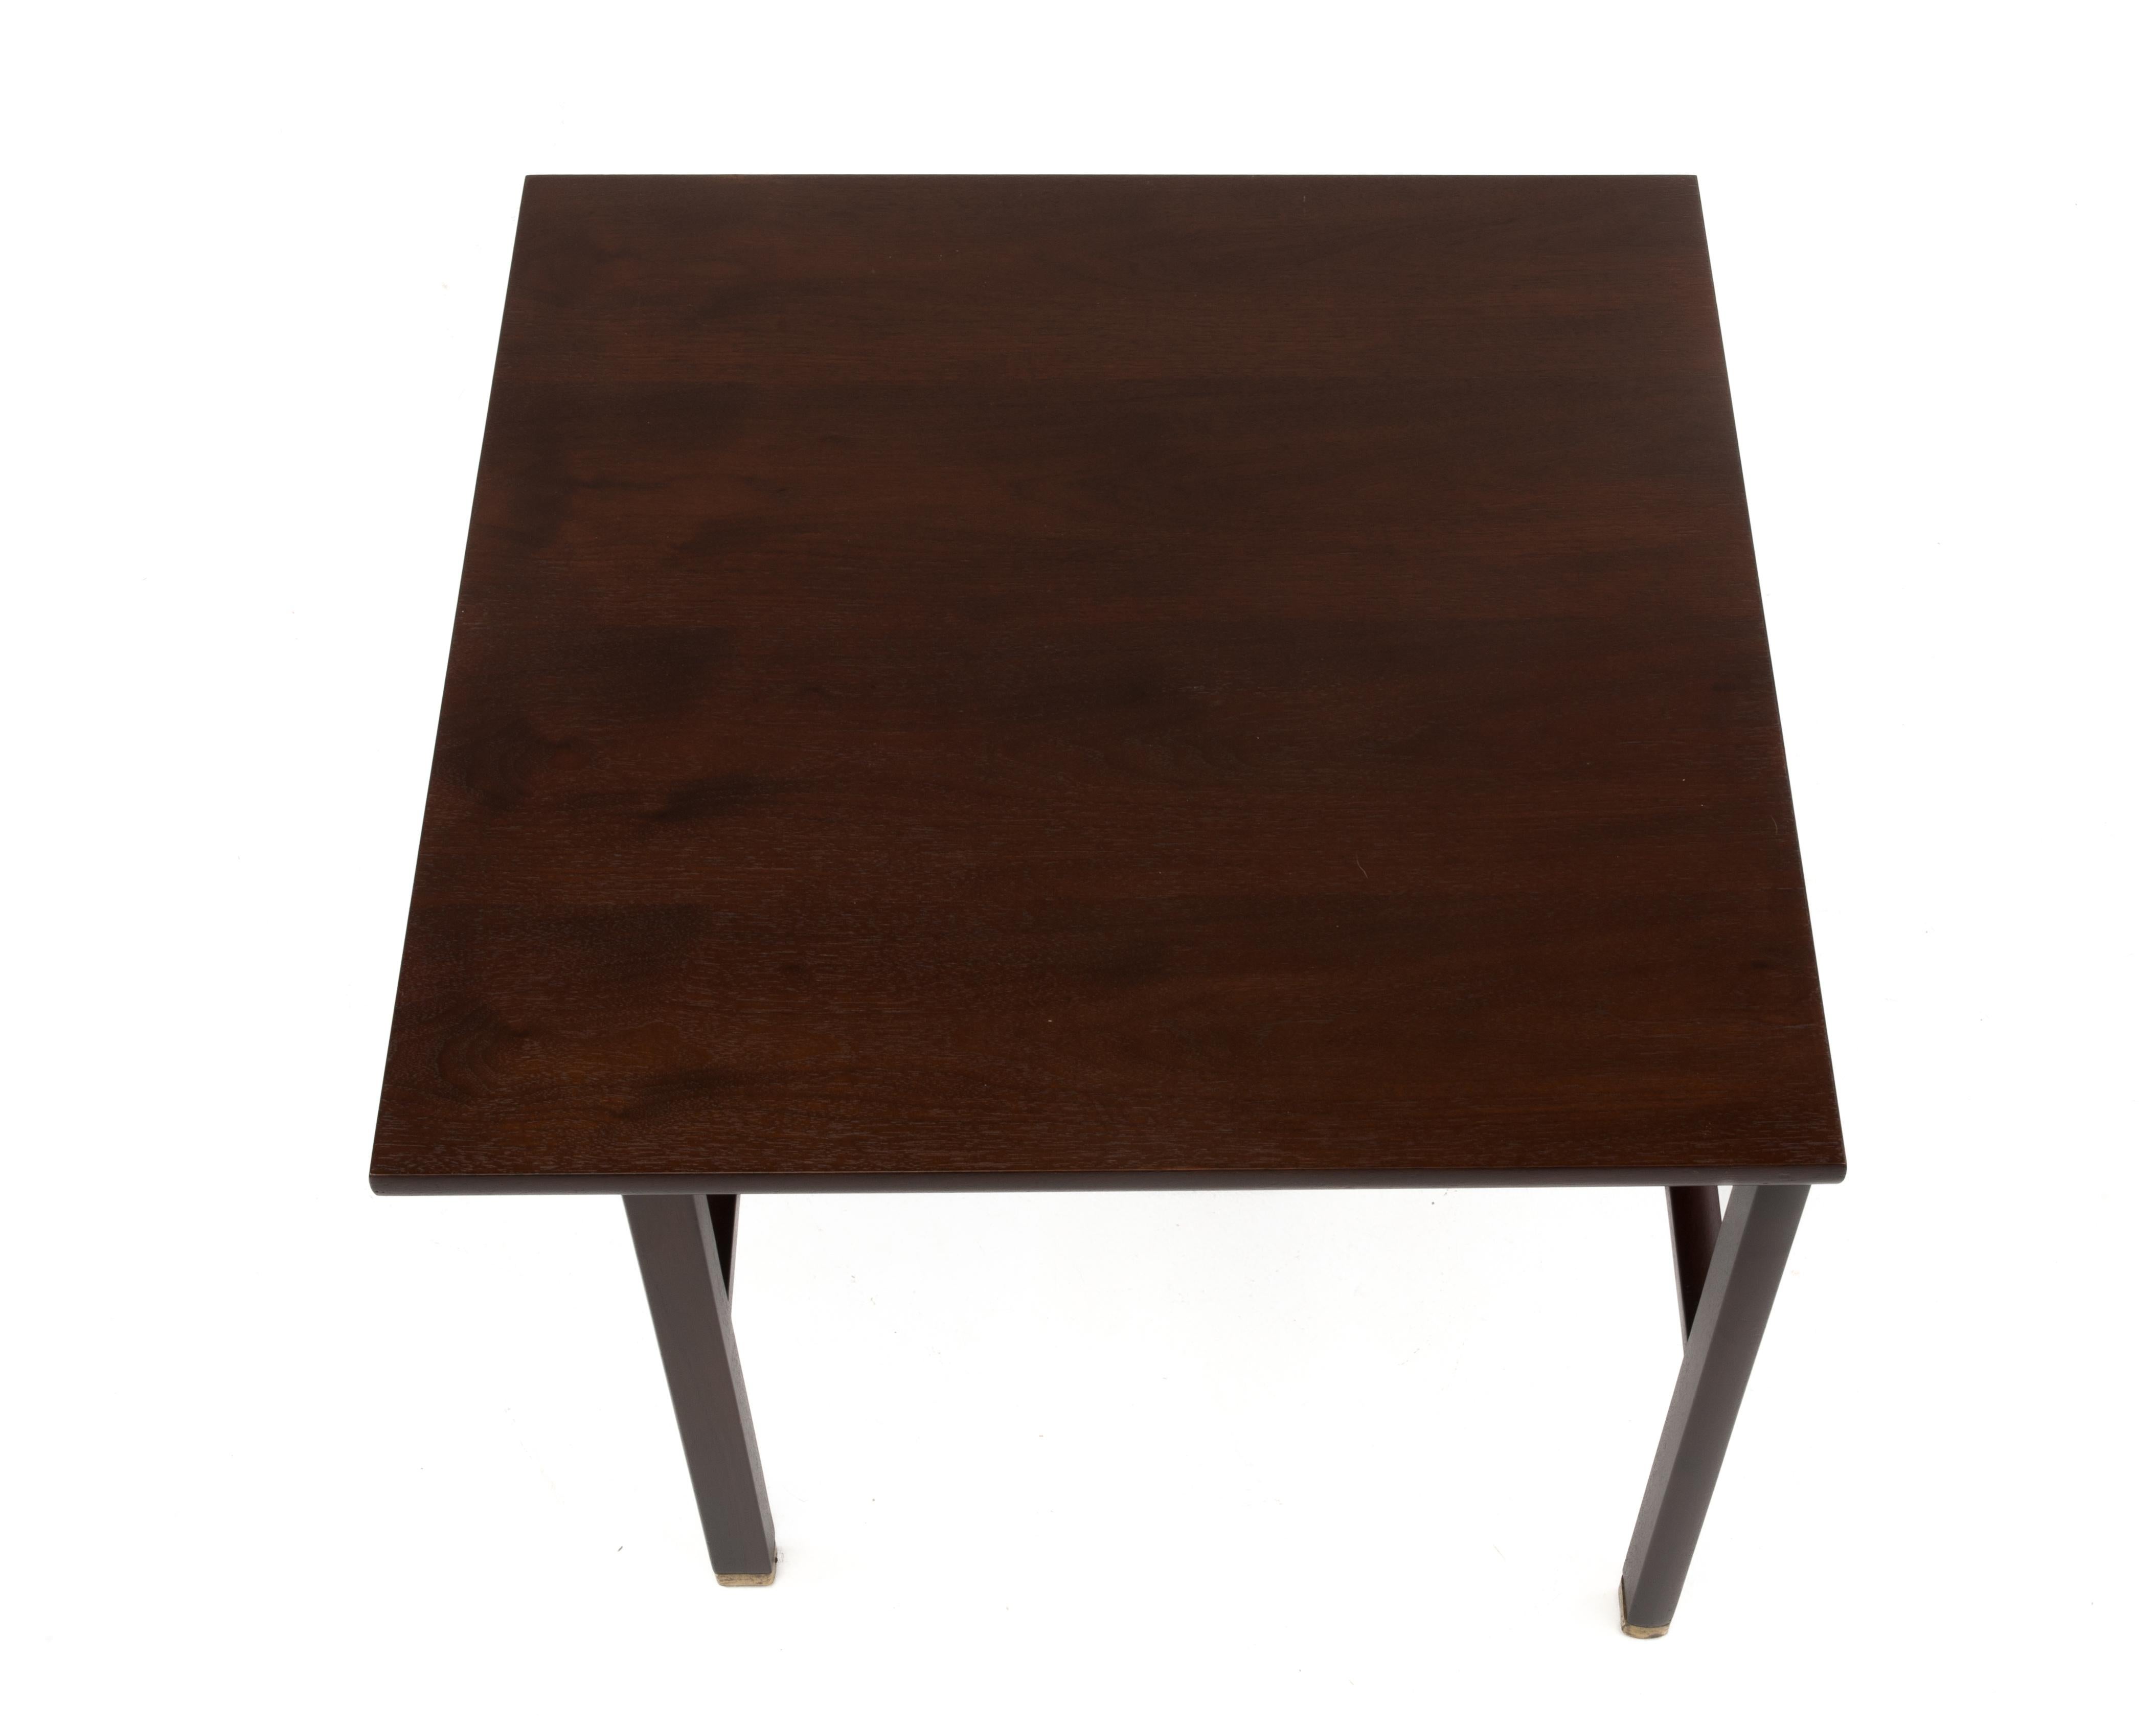 Mid-20th Century Cantilevered Edward Wormley Dunbar Square Side End Table 1960s Walnut Brass Tag